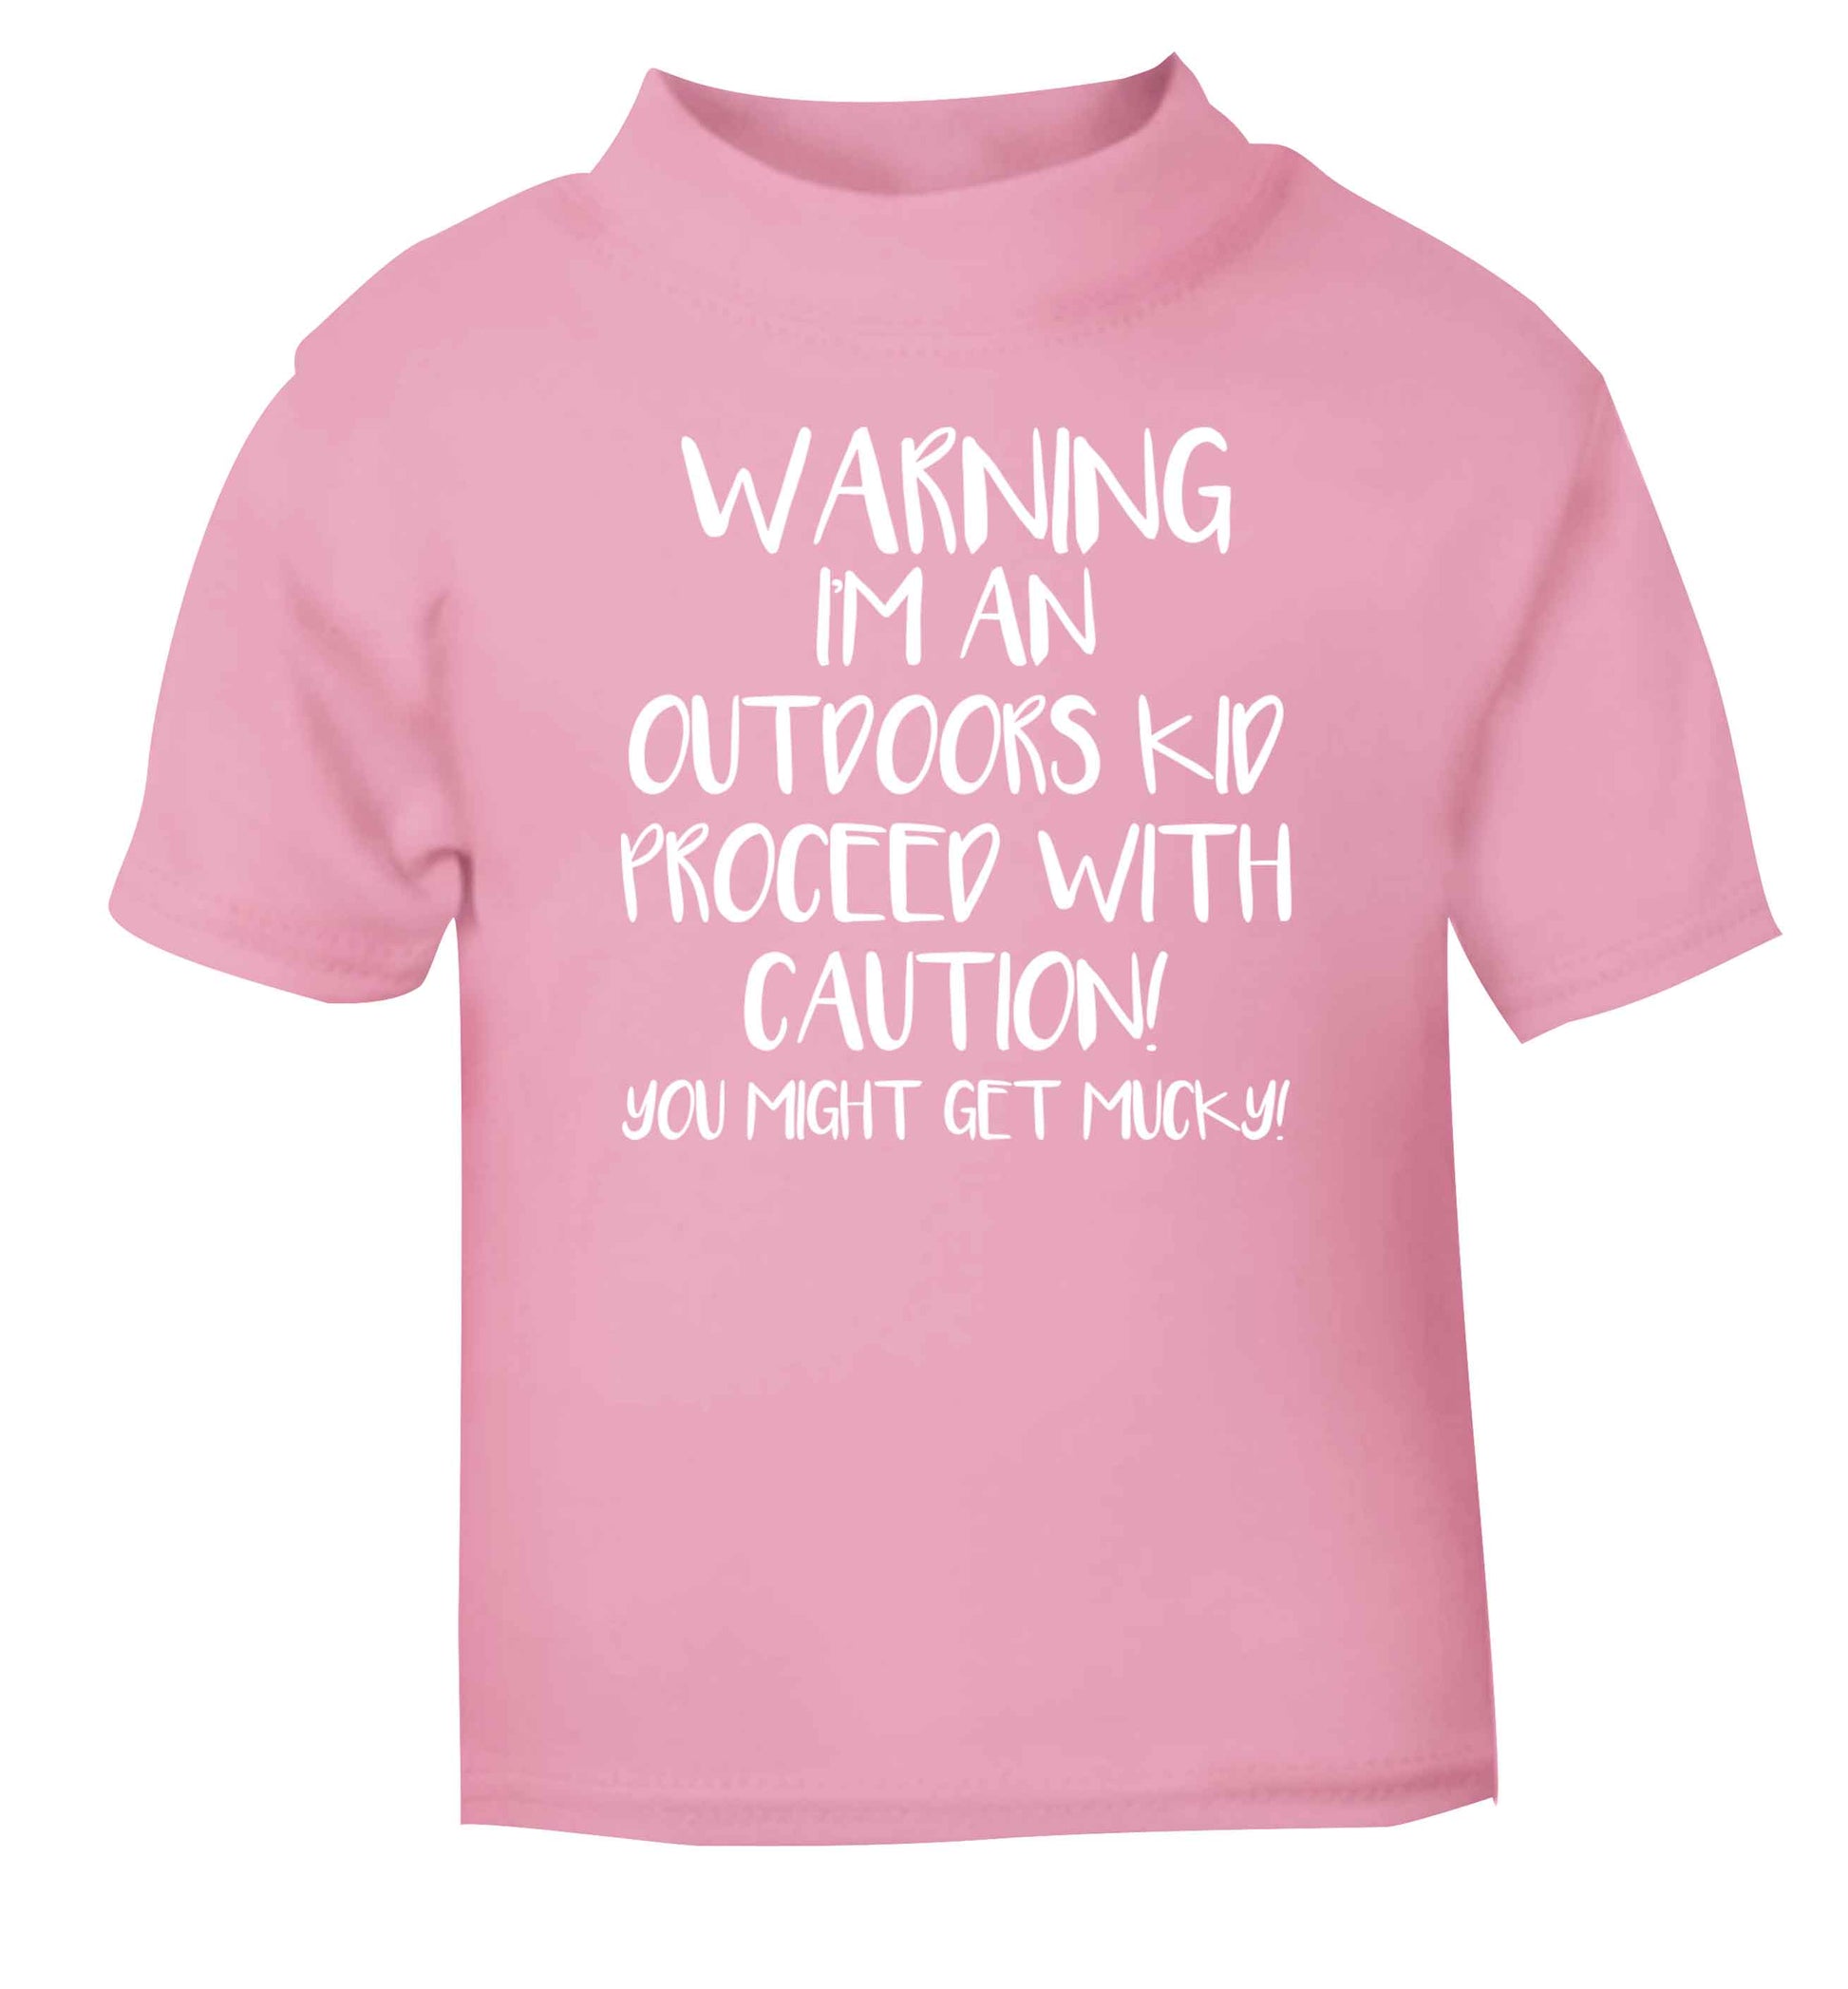 Warning I'm an outdoors kid! Proceed with caution you might get mucky light pink Baby Toddler Tshirt 2 Years